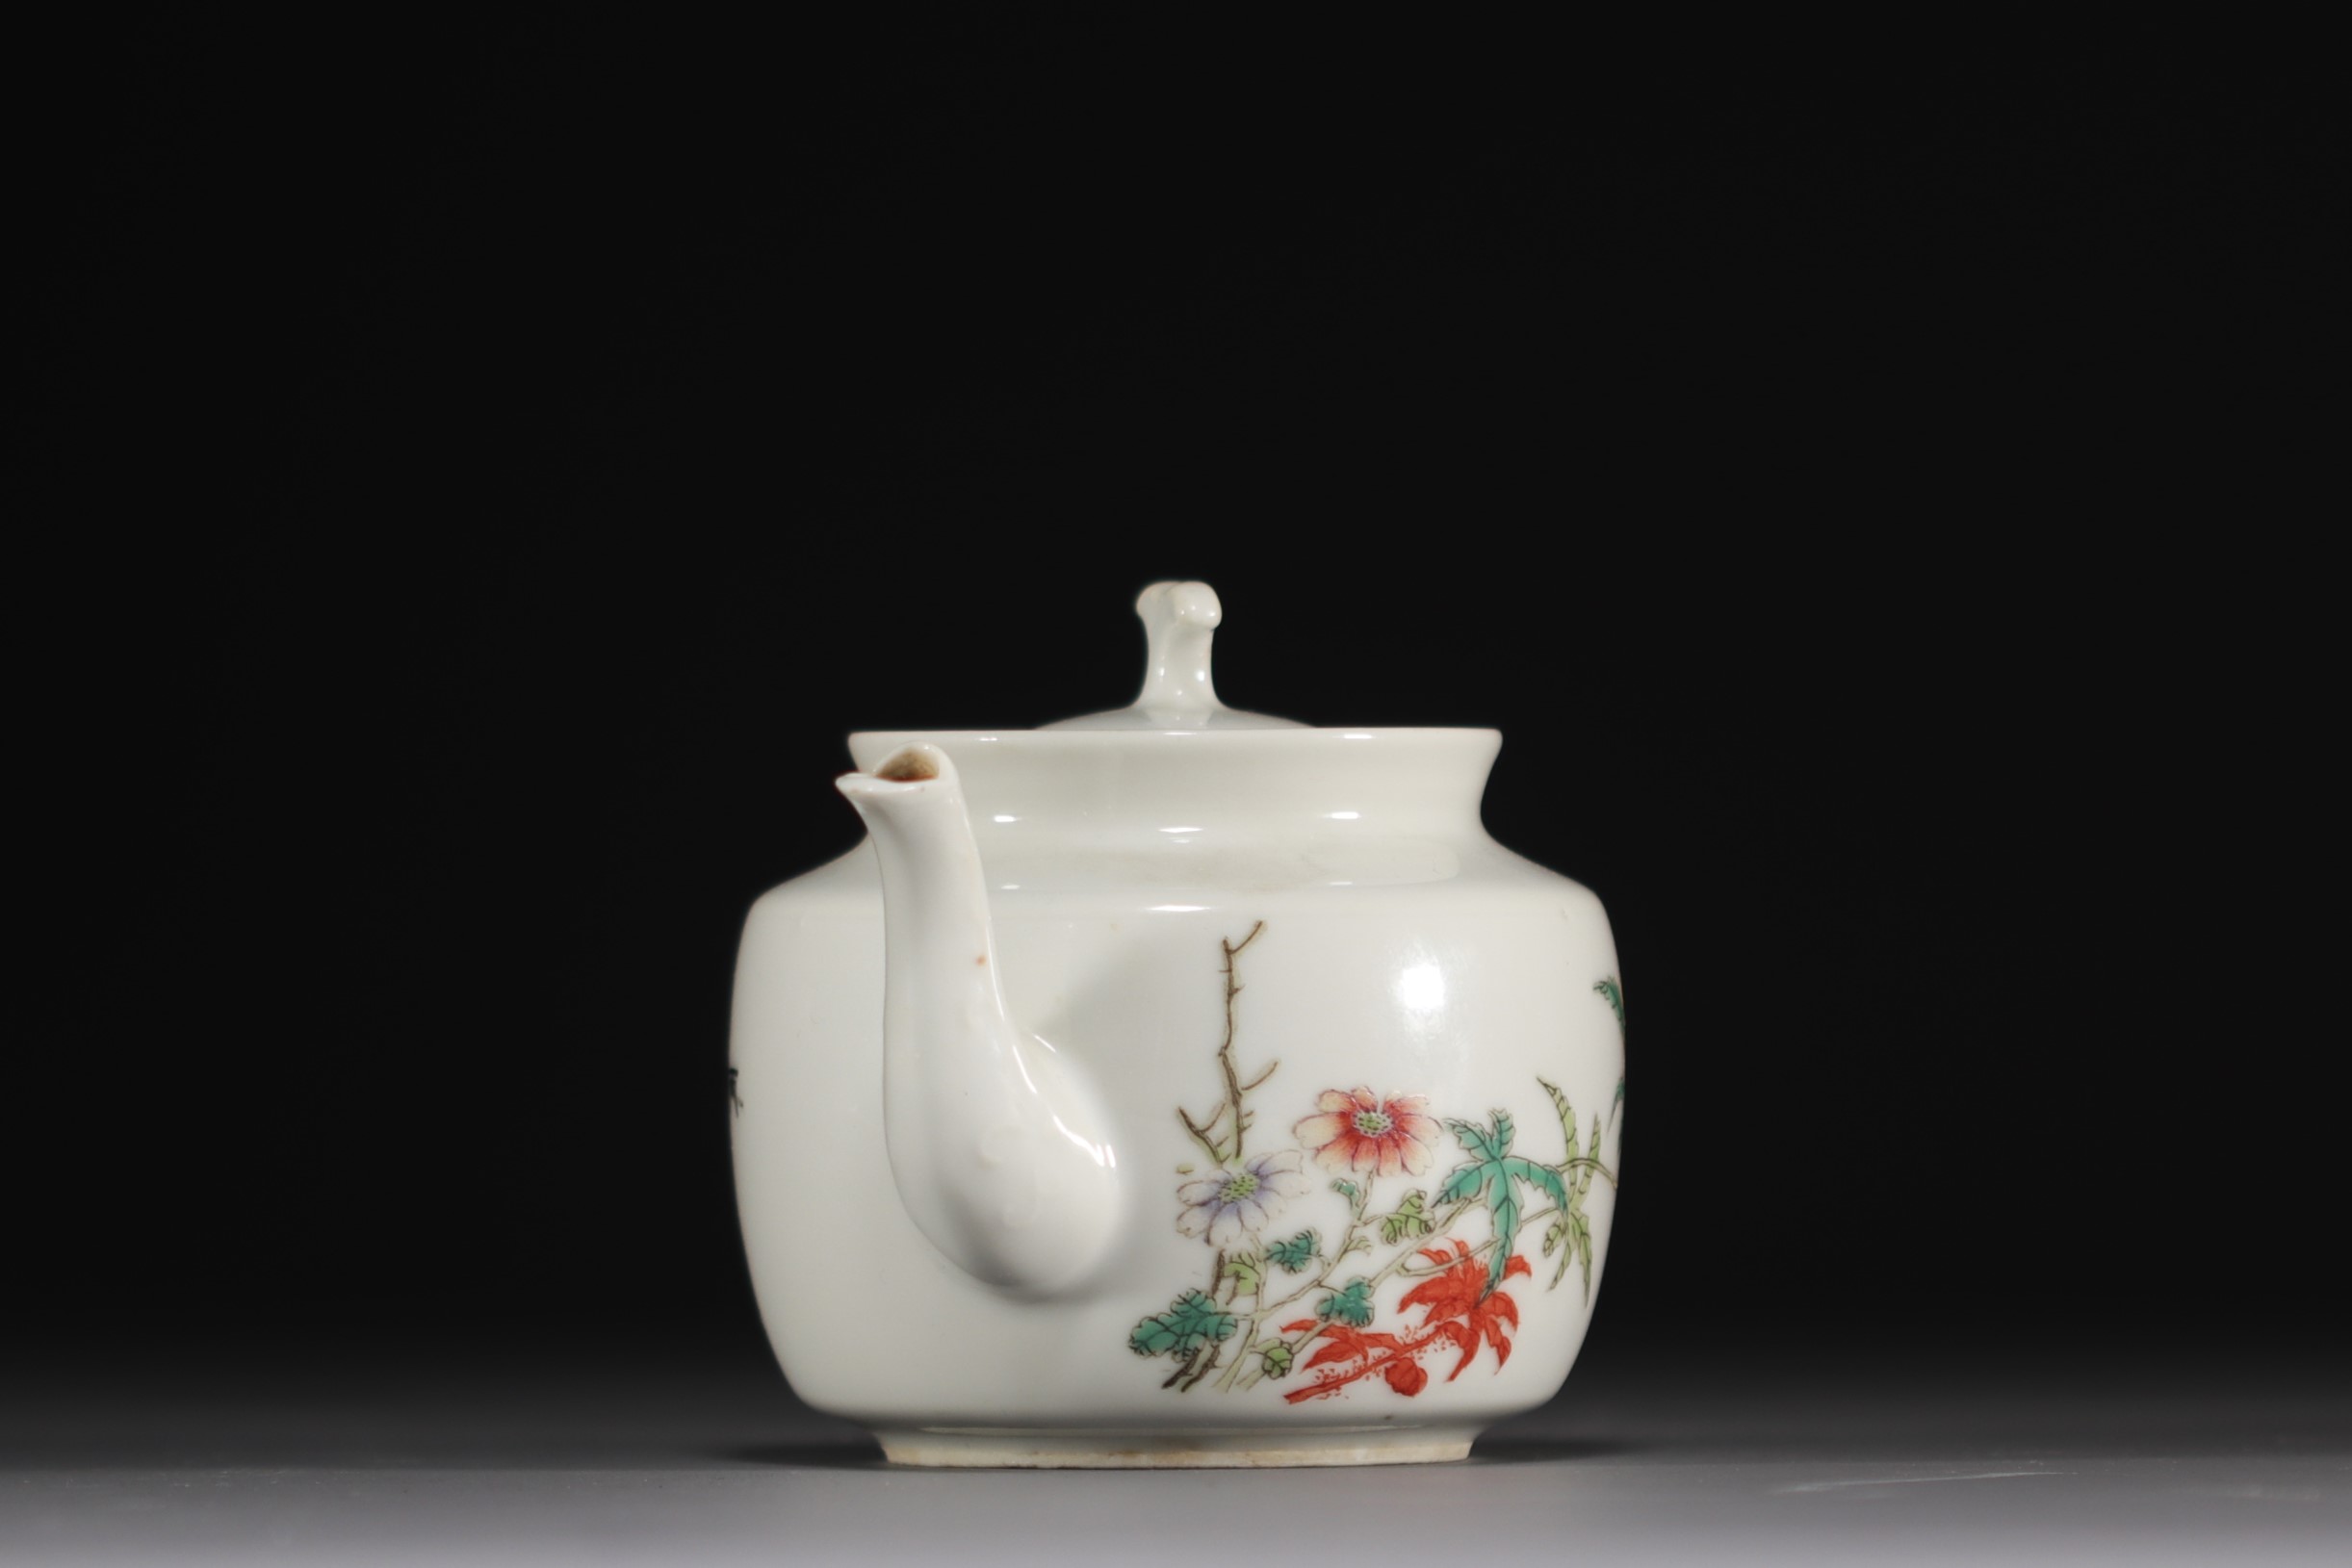 China - Jiangxi porcelain teapot with floral decoration, early 20th century. - Image 2 of 4